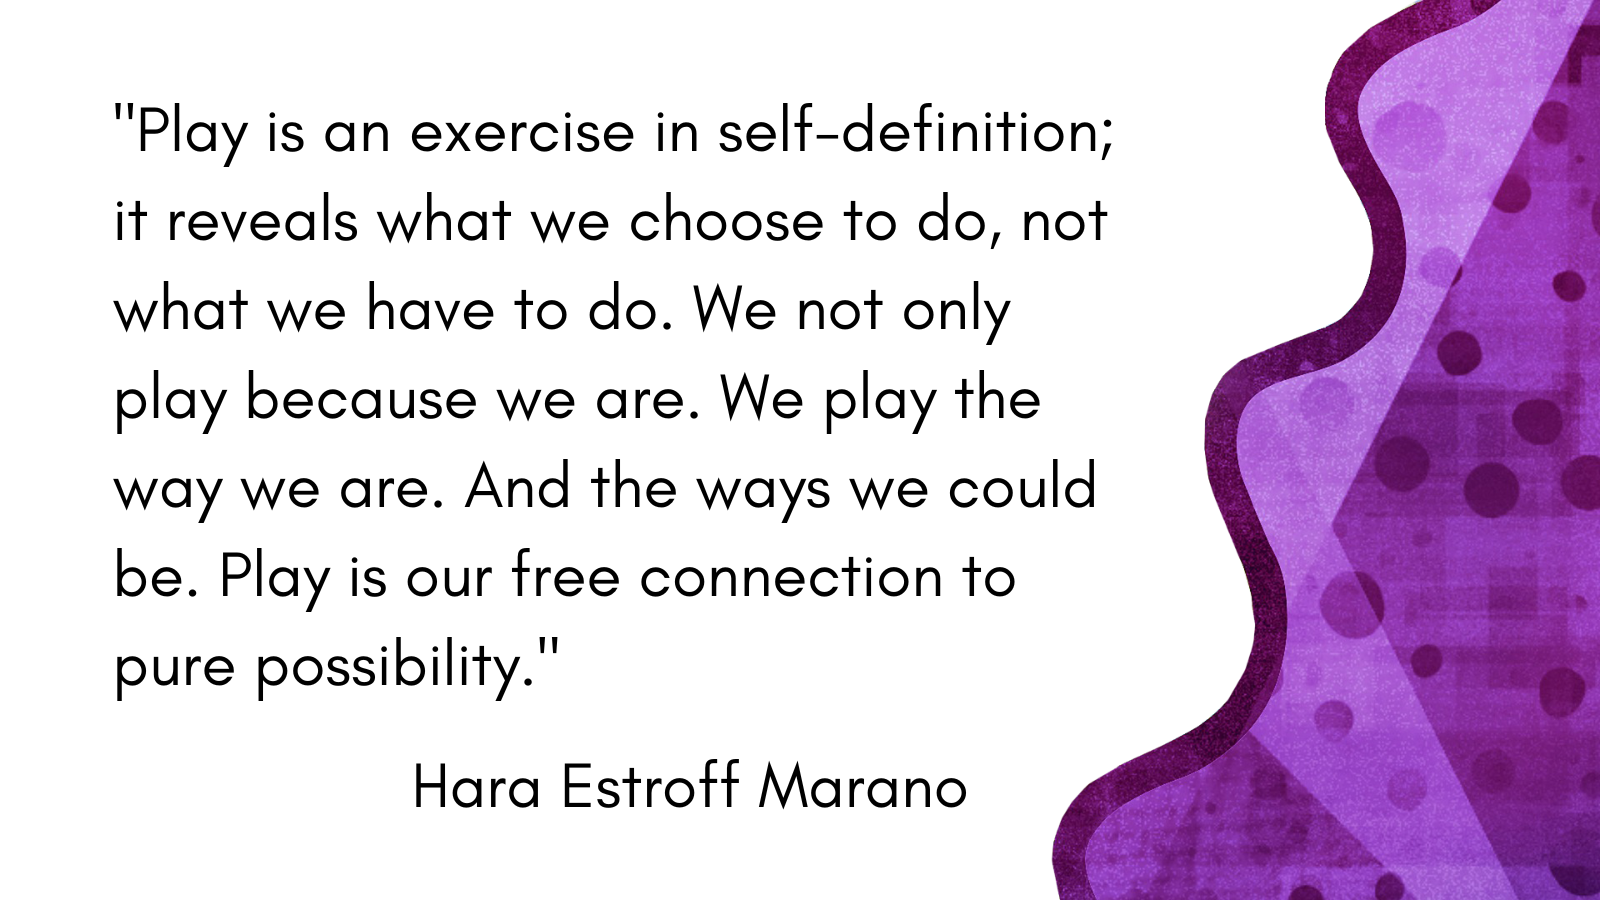 Play is our free connection to pure possibility - Hara Estroff Murano